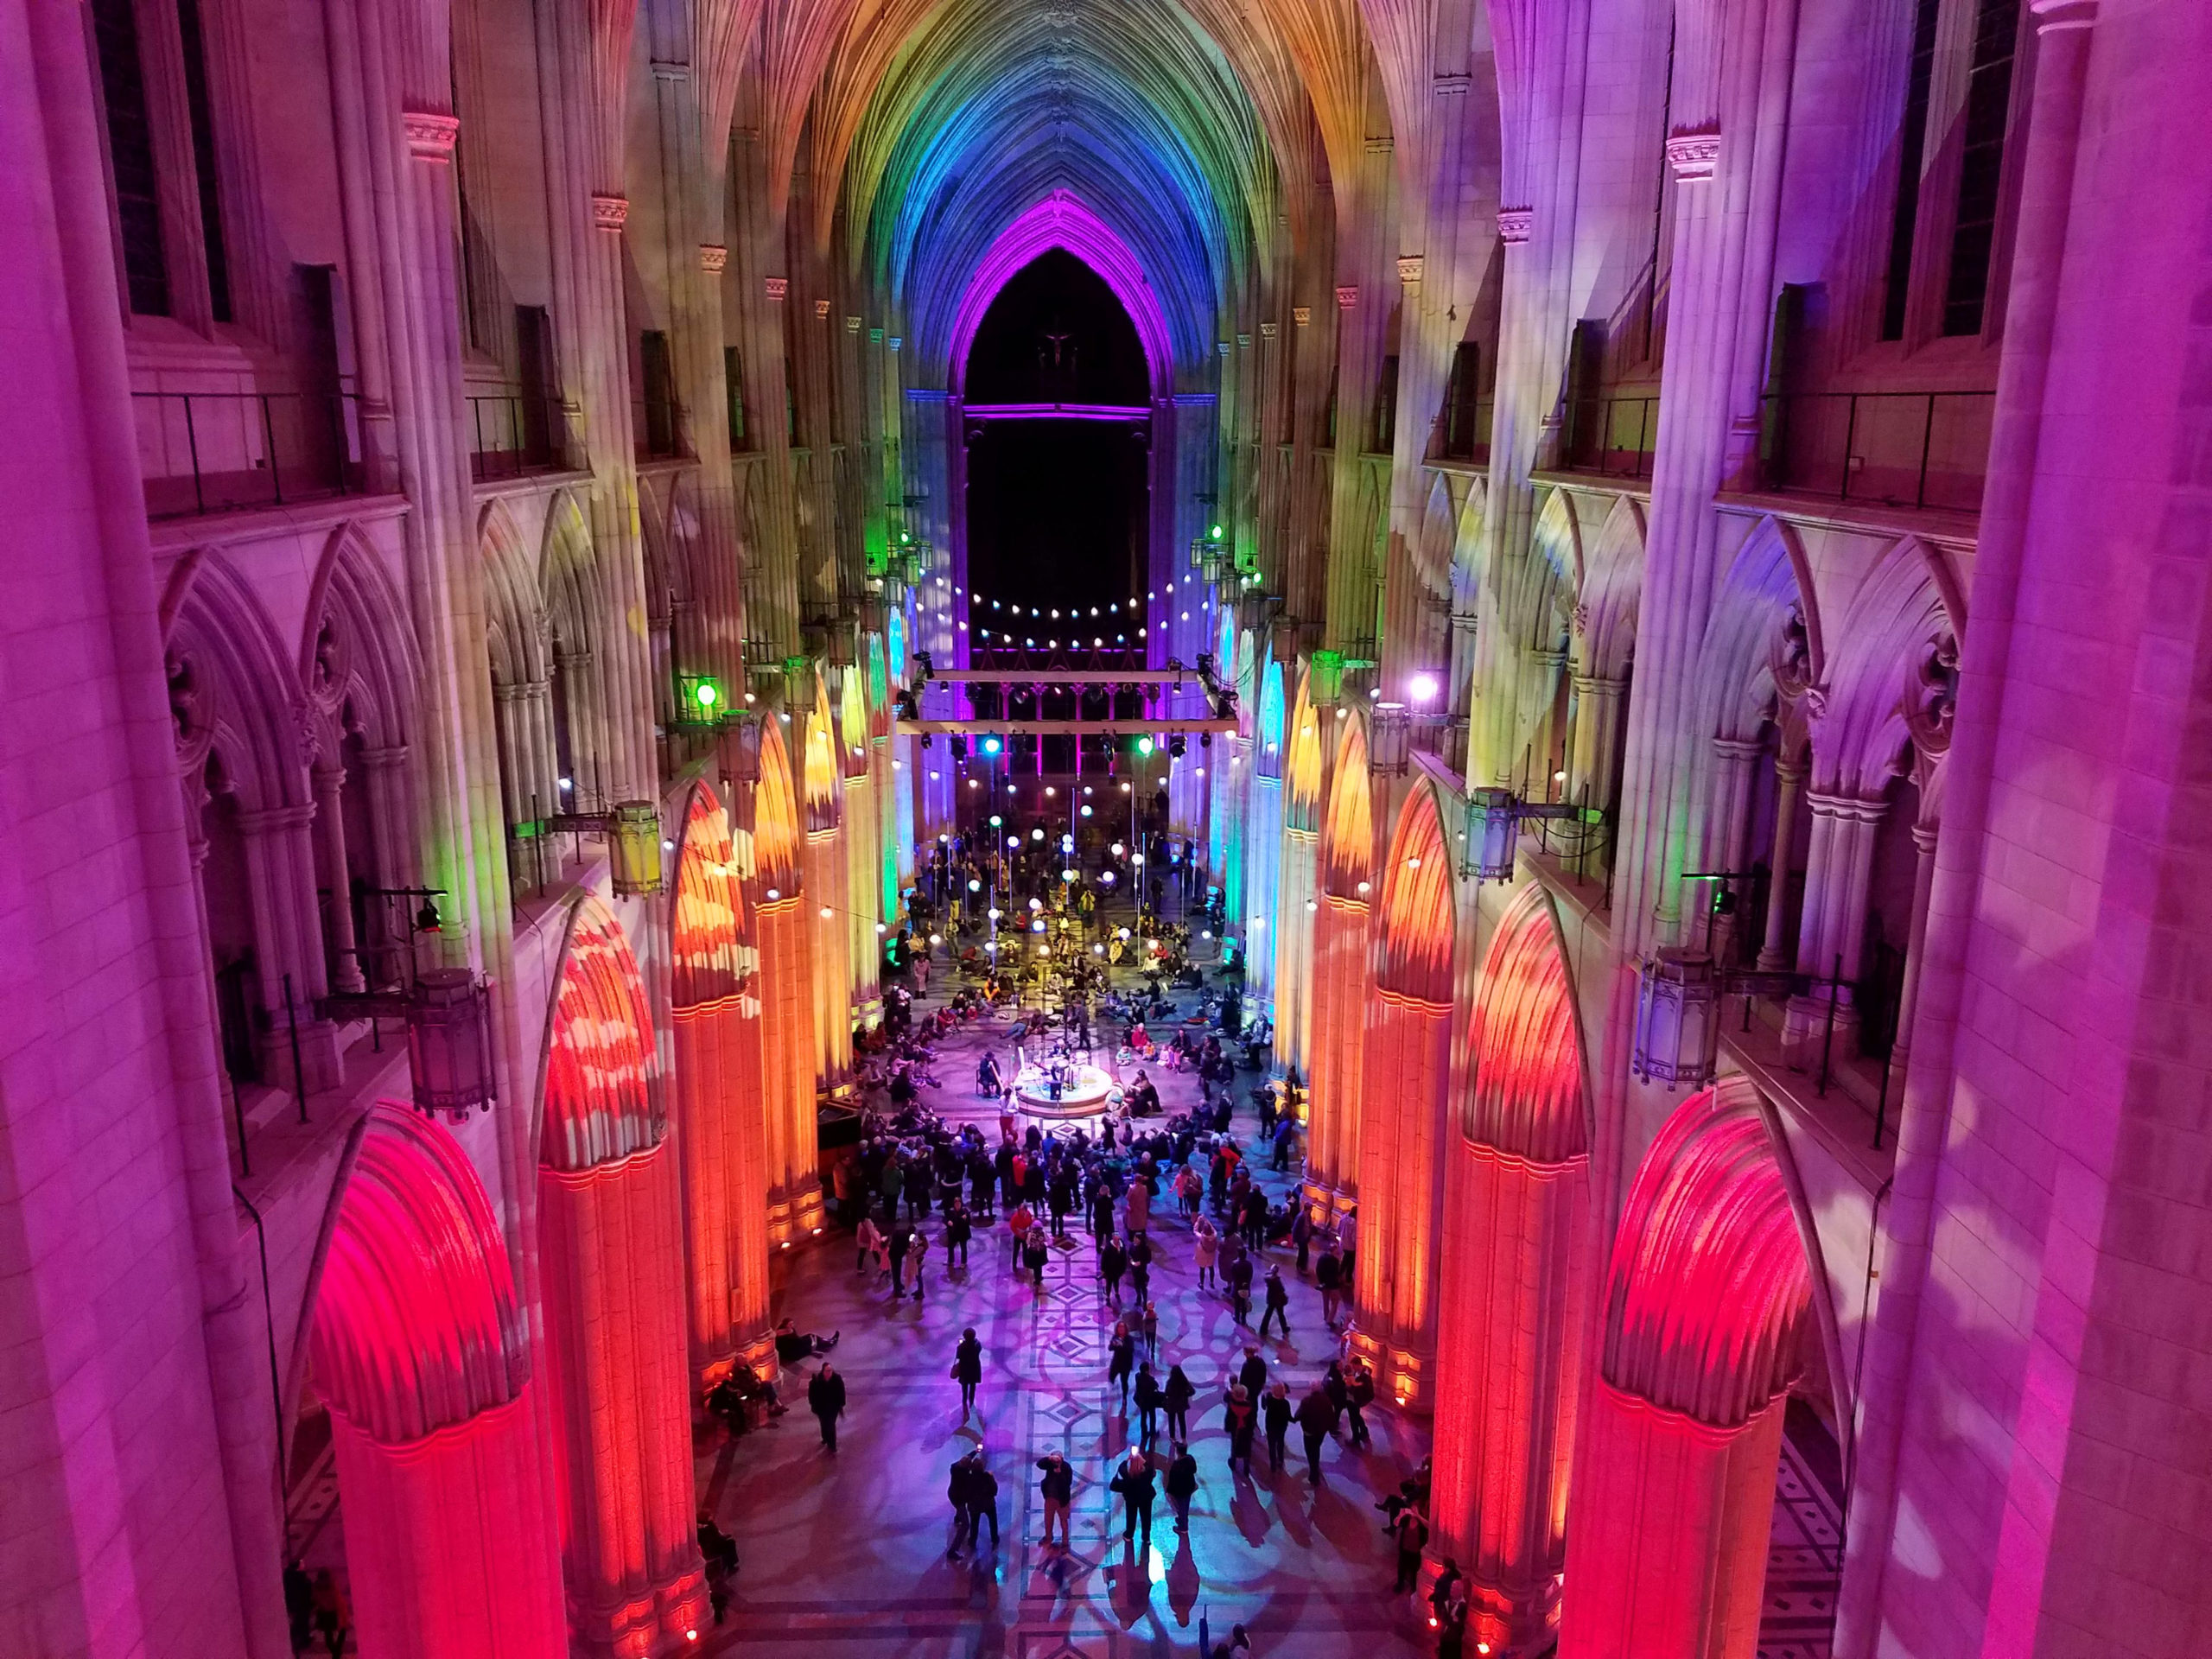 Just Launched: Introducing the Washington National Cathedral with